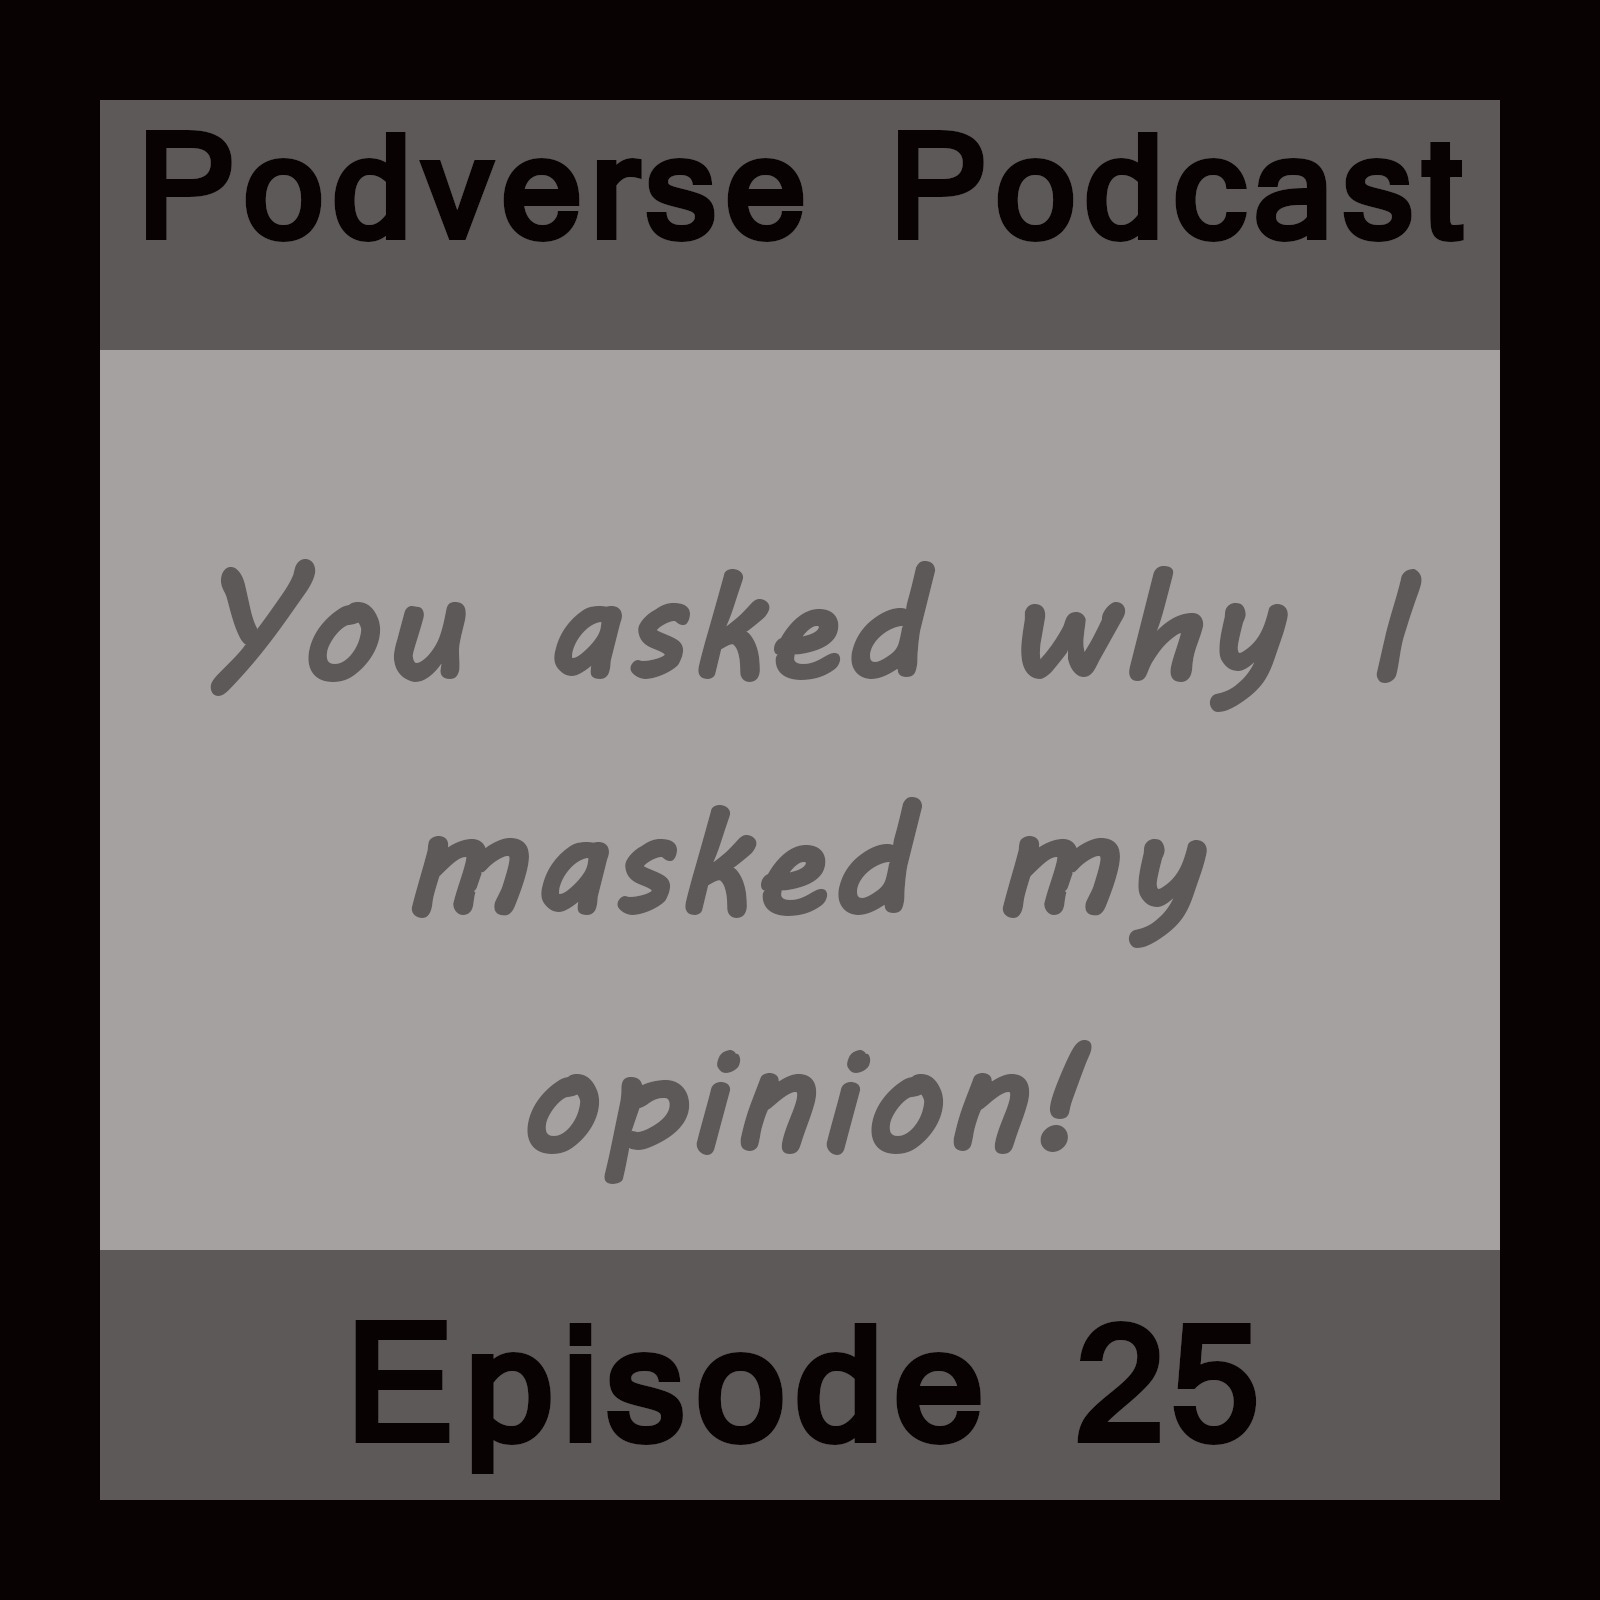 You asked why I masked my opinion - Episode 25